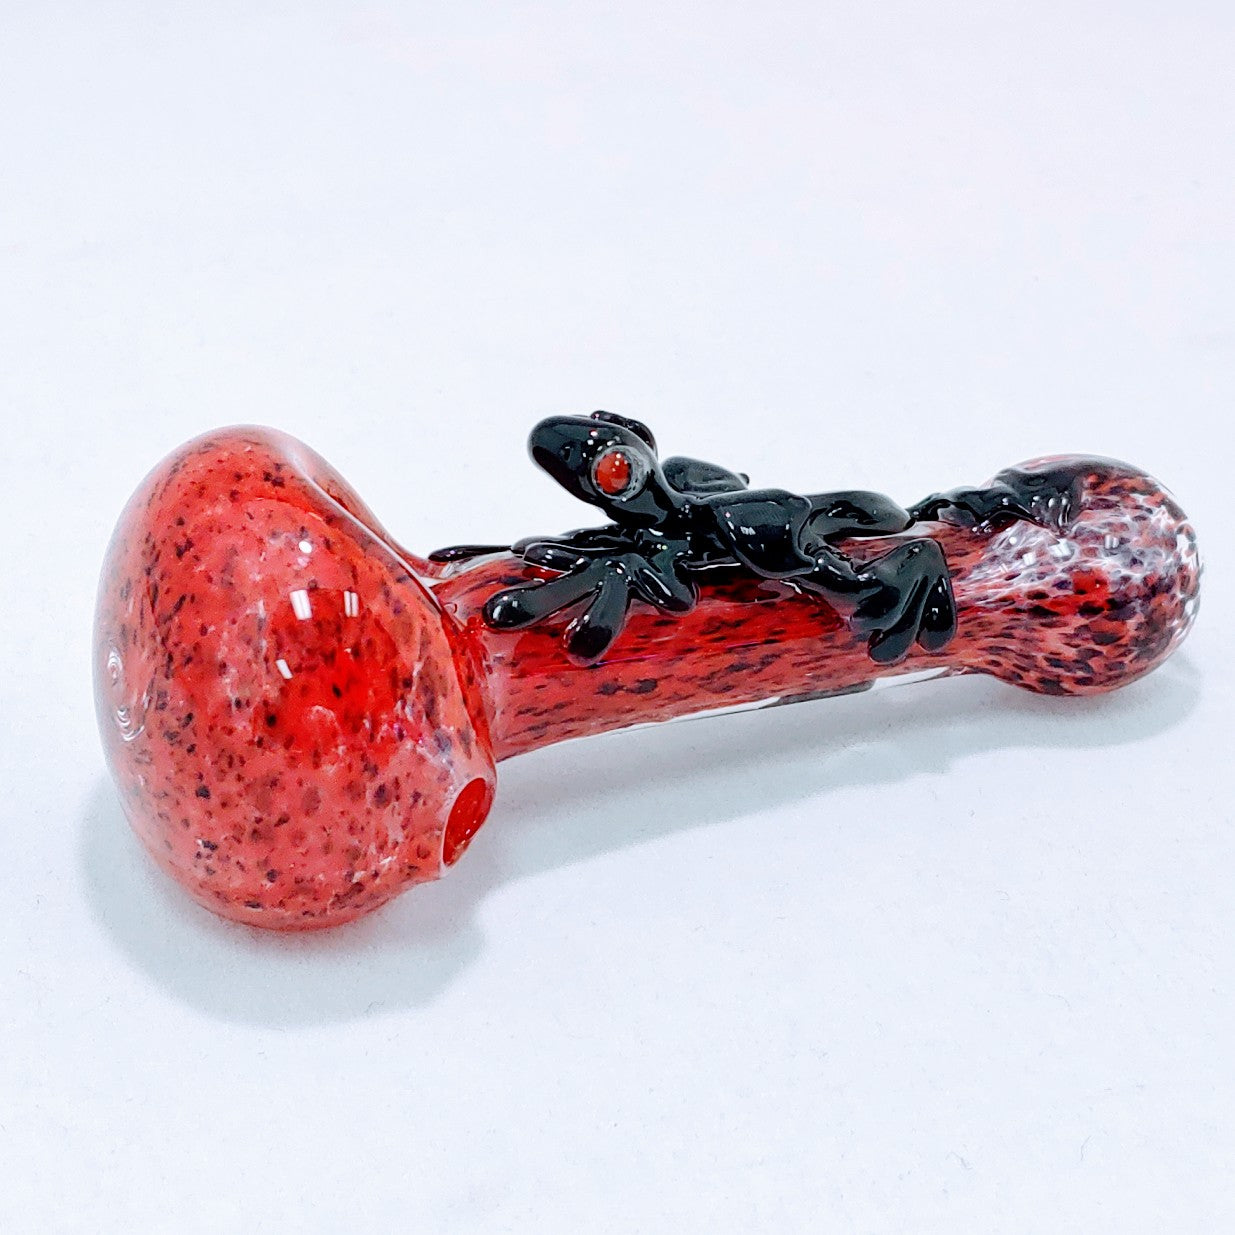 Baby Dragon Glass Hand Smoking Pipe  4"-5" in Length; All pipes are made with a 3-hole bowl which serves as a built in glass screen, helping to cut back on any unsmoked material accidentally being sucked through